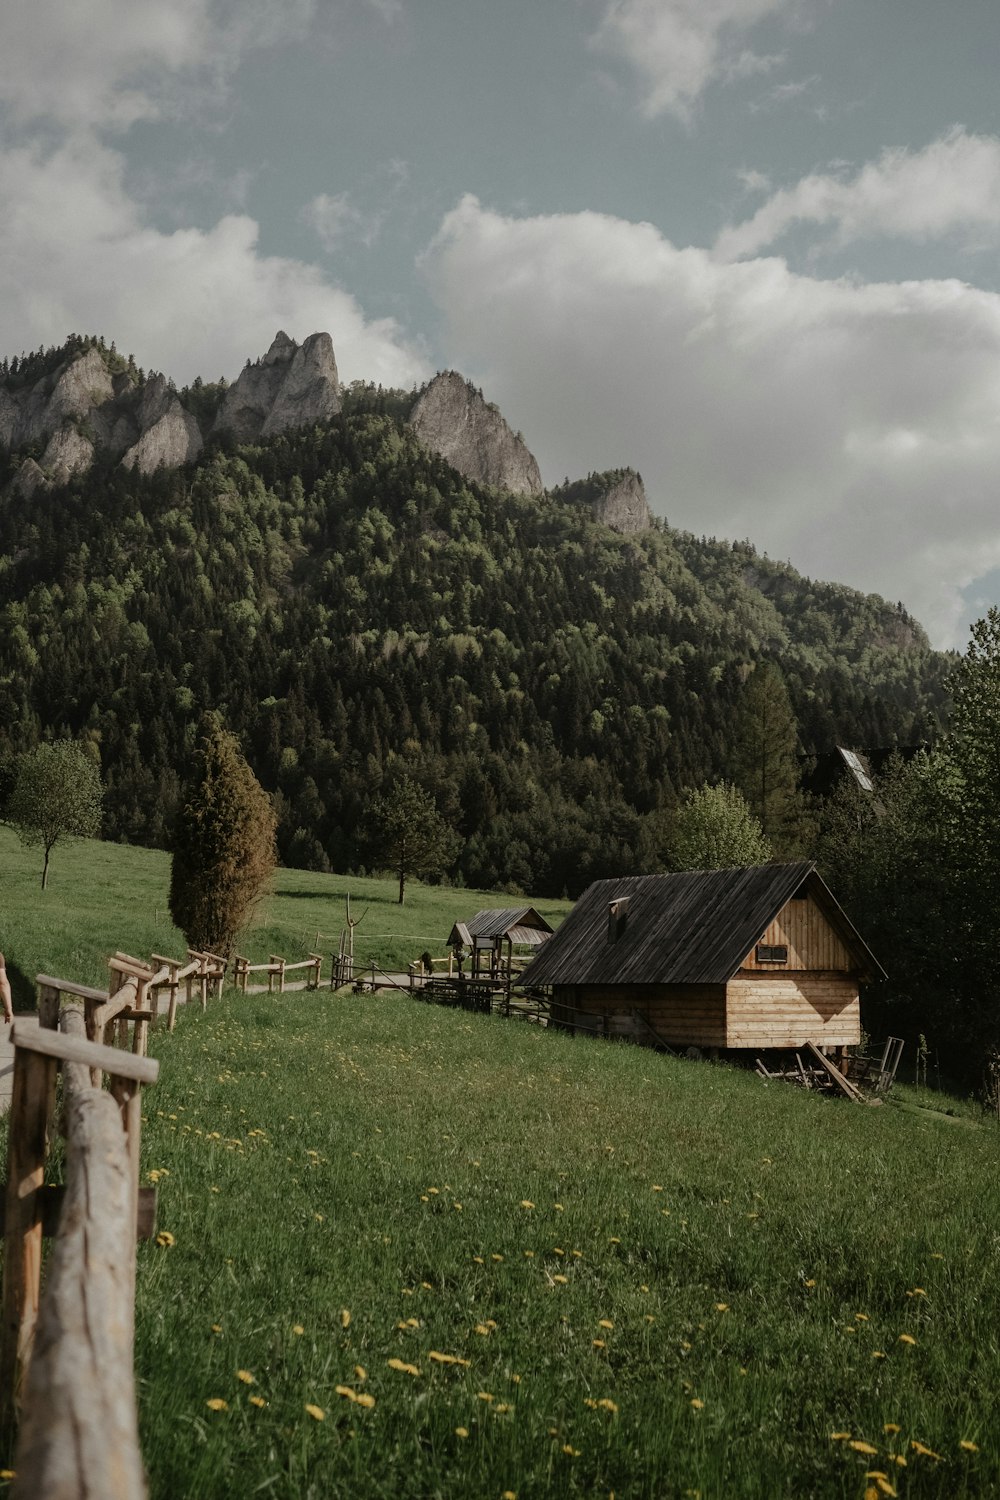 a small cabin in a field with mountains in the background